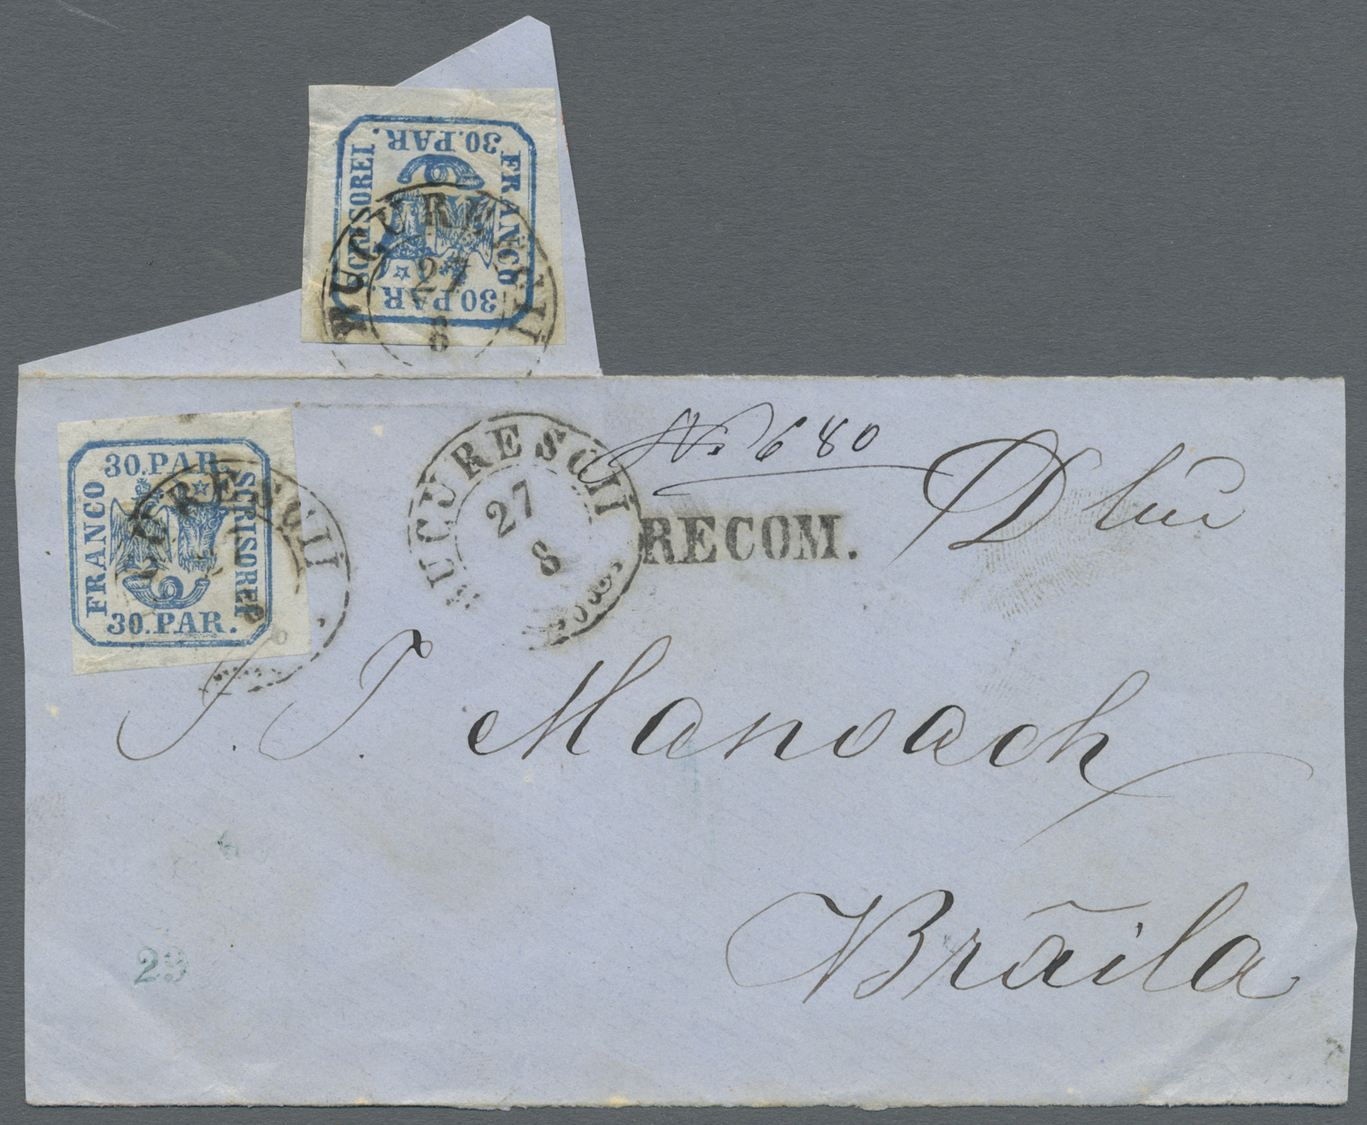 Br/Brrst Rumänien: 1860's: Front + Small Part Of Back Of Registered Cover From Bucarest To Braila, Franked With Two Sin - Lettres & Documents